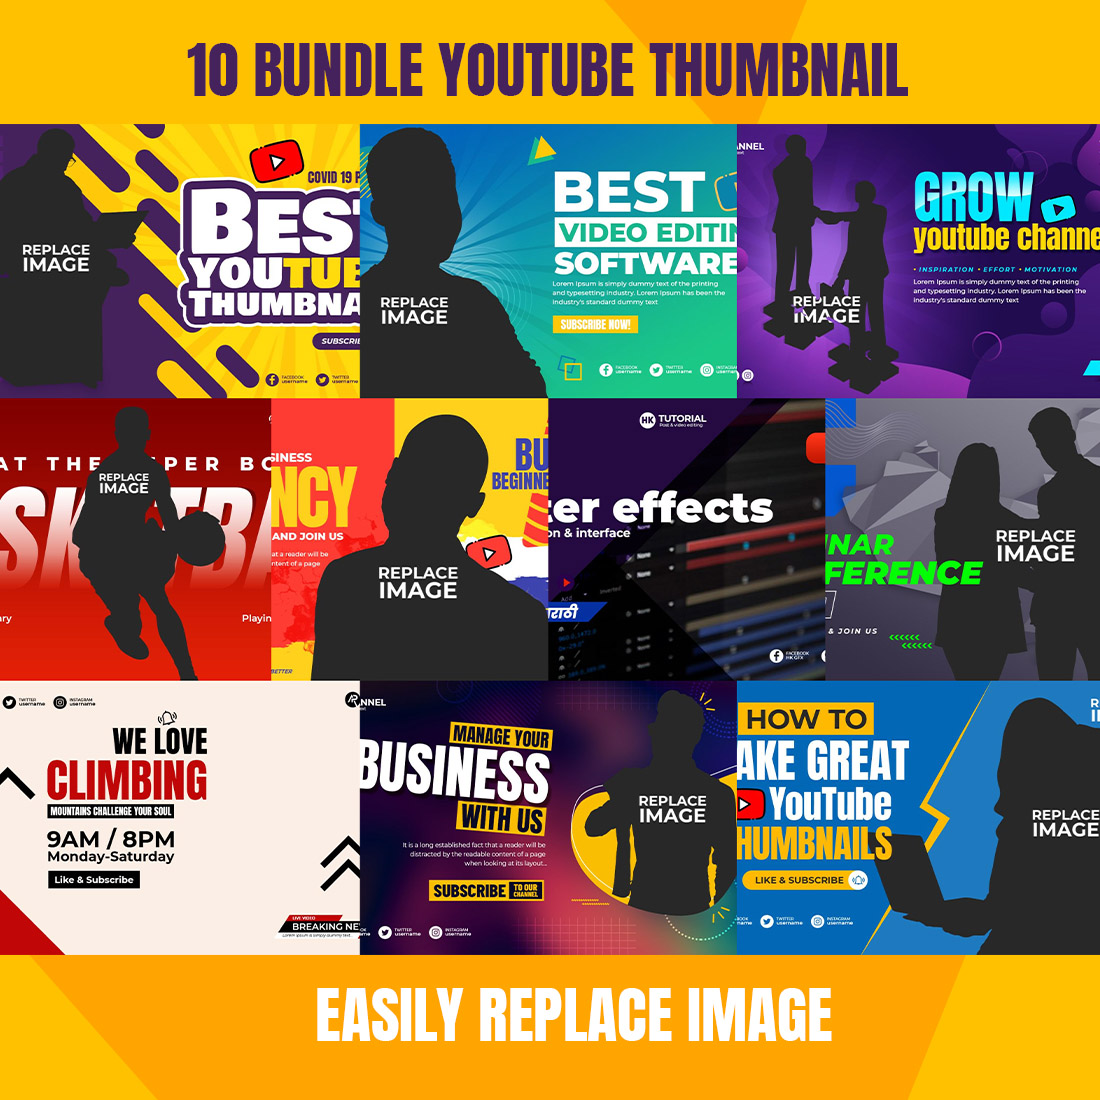 YouTube Thumbnail Template cover image.